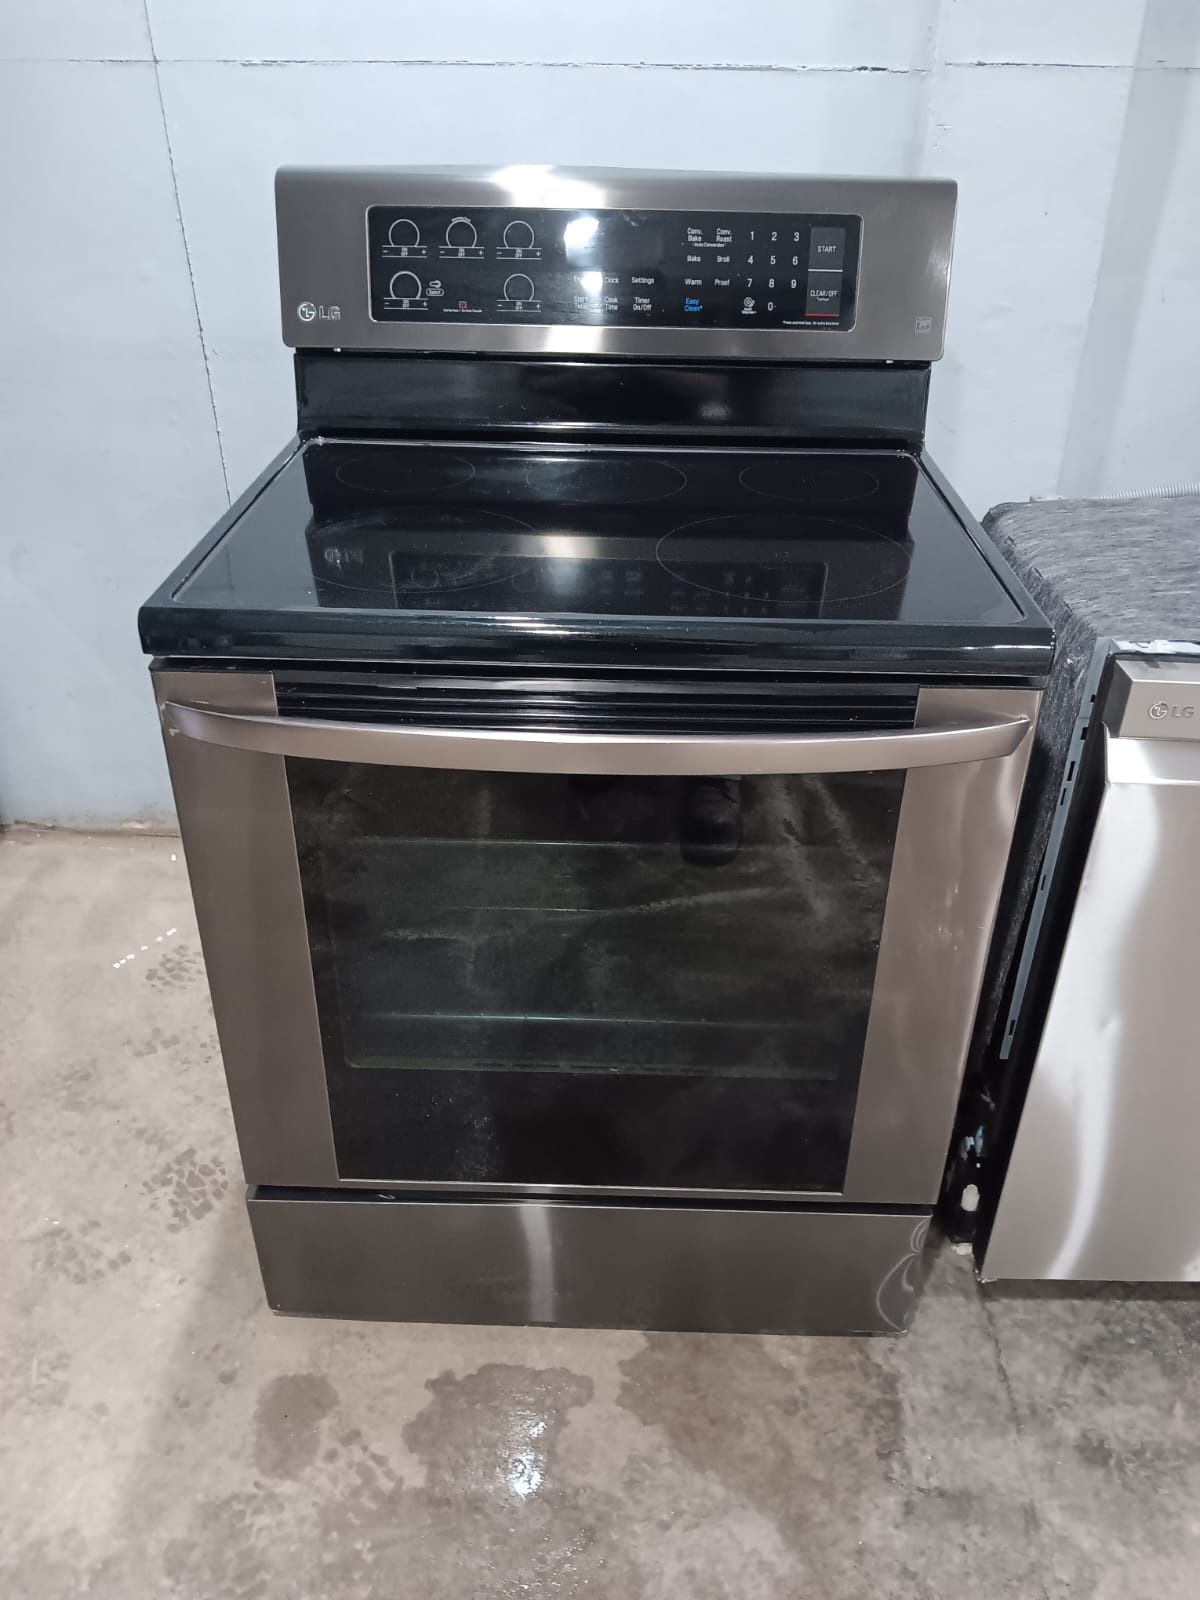 LG Stove Electric And dishwasher Stainless Steel 